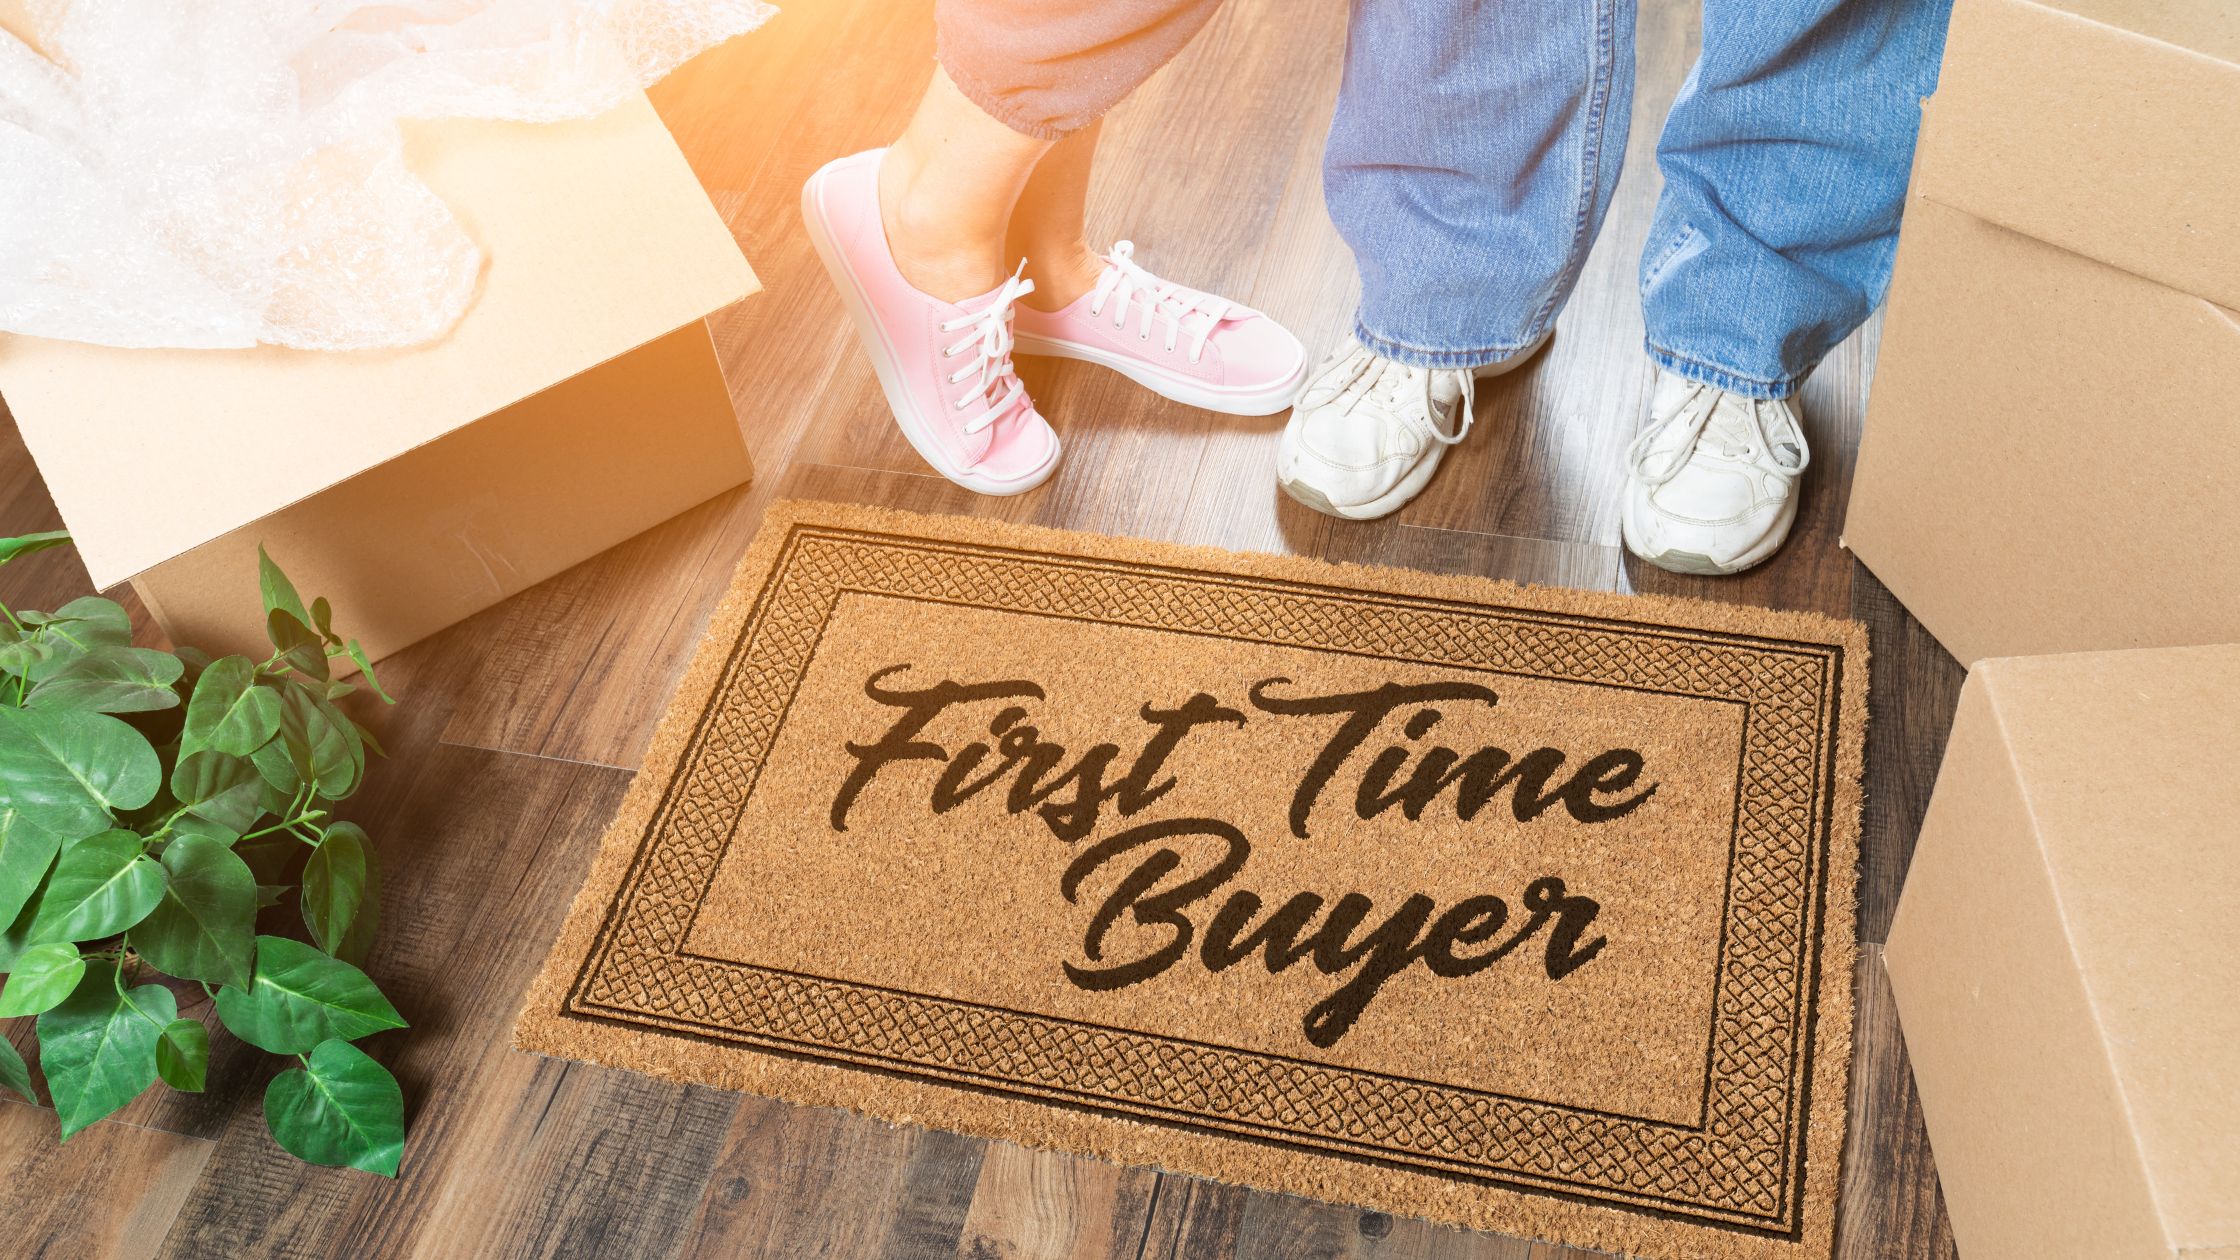 First-Time Homebuyer in Idaho? Read These Tips